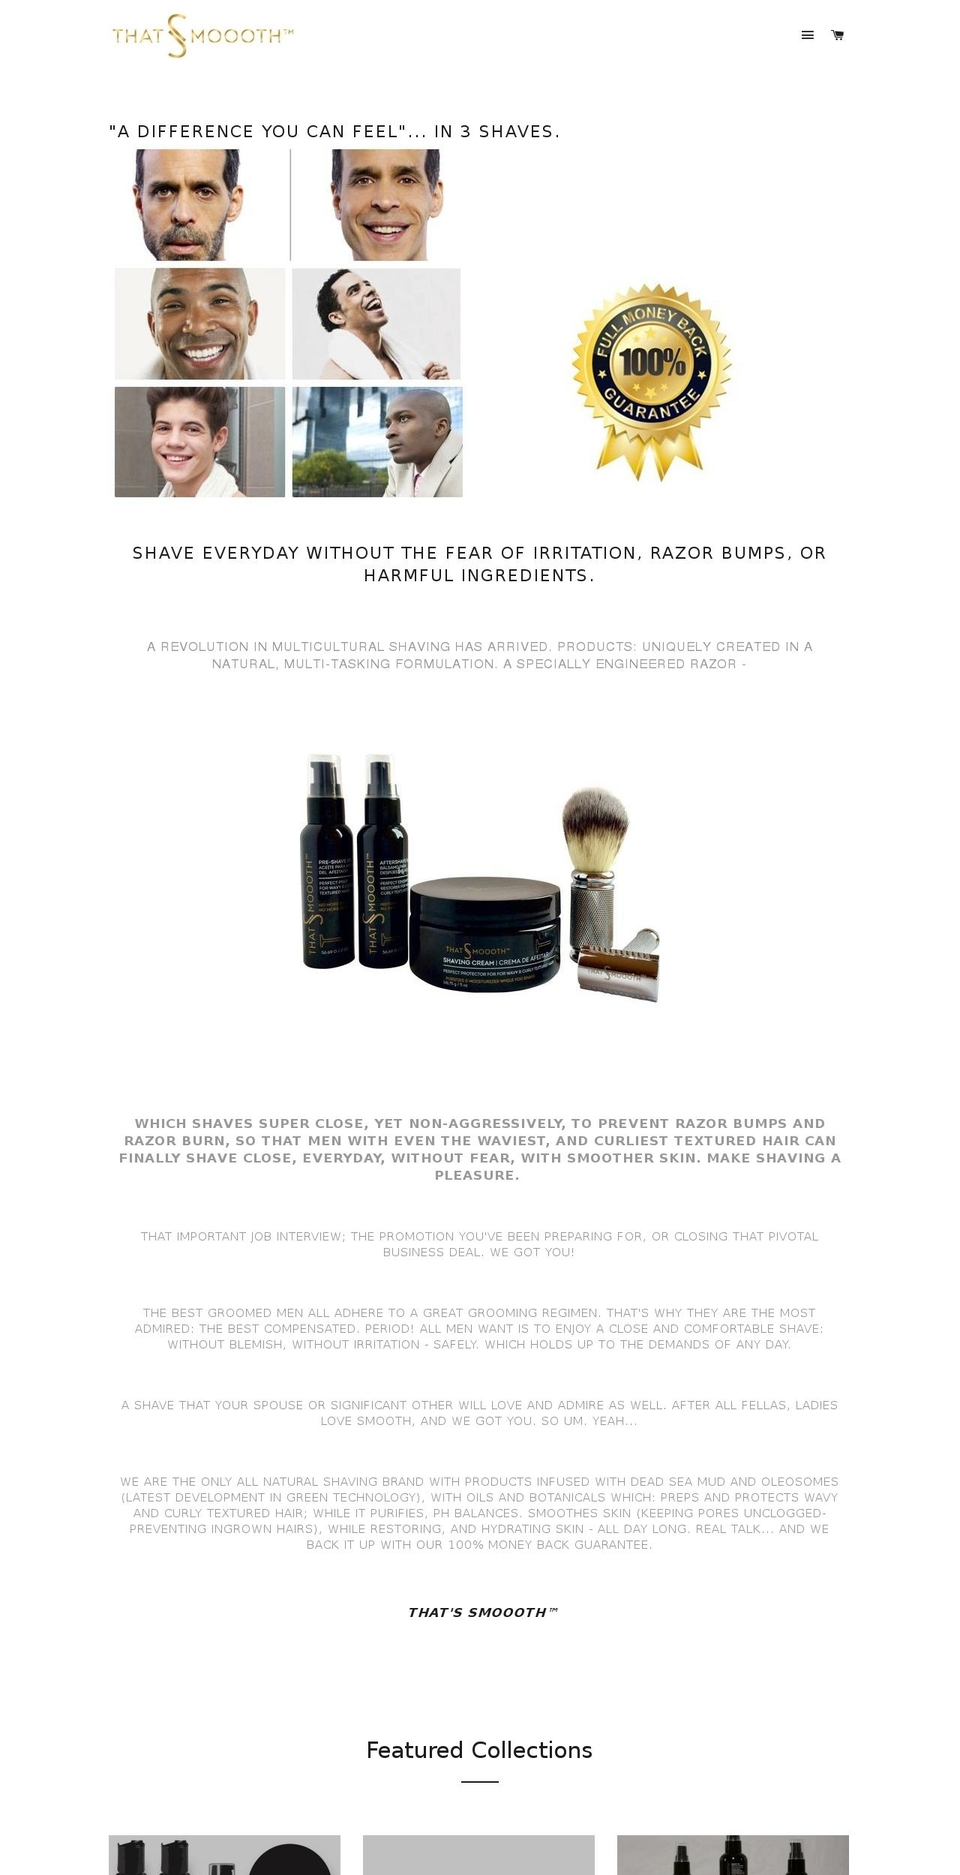 Brooklyn Shopify theme site example theessenceofsmooth.com